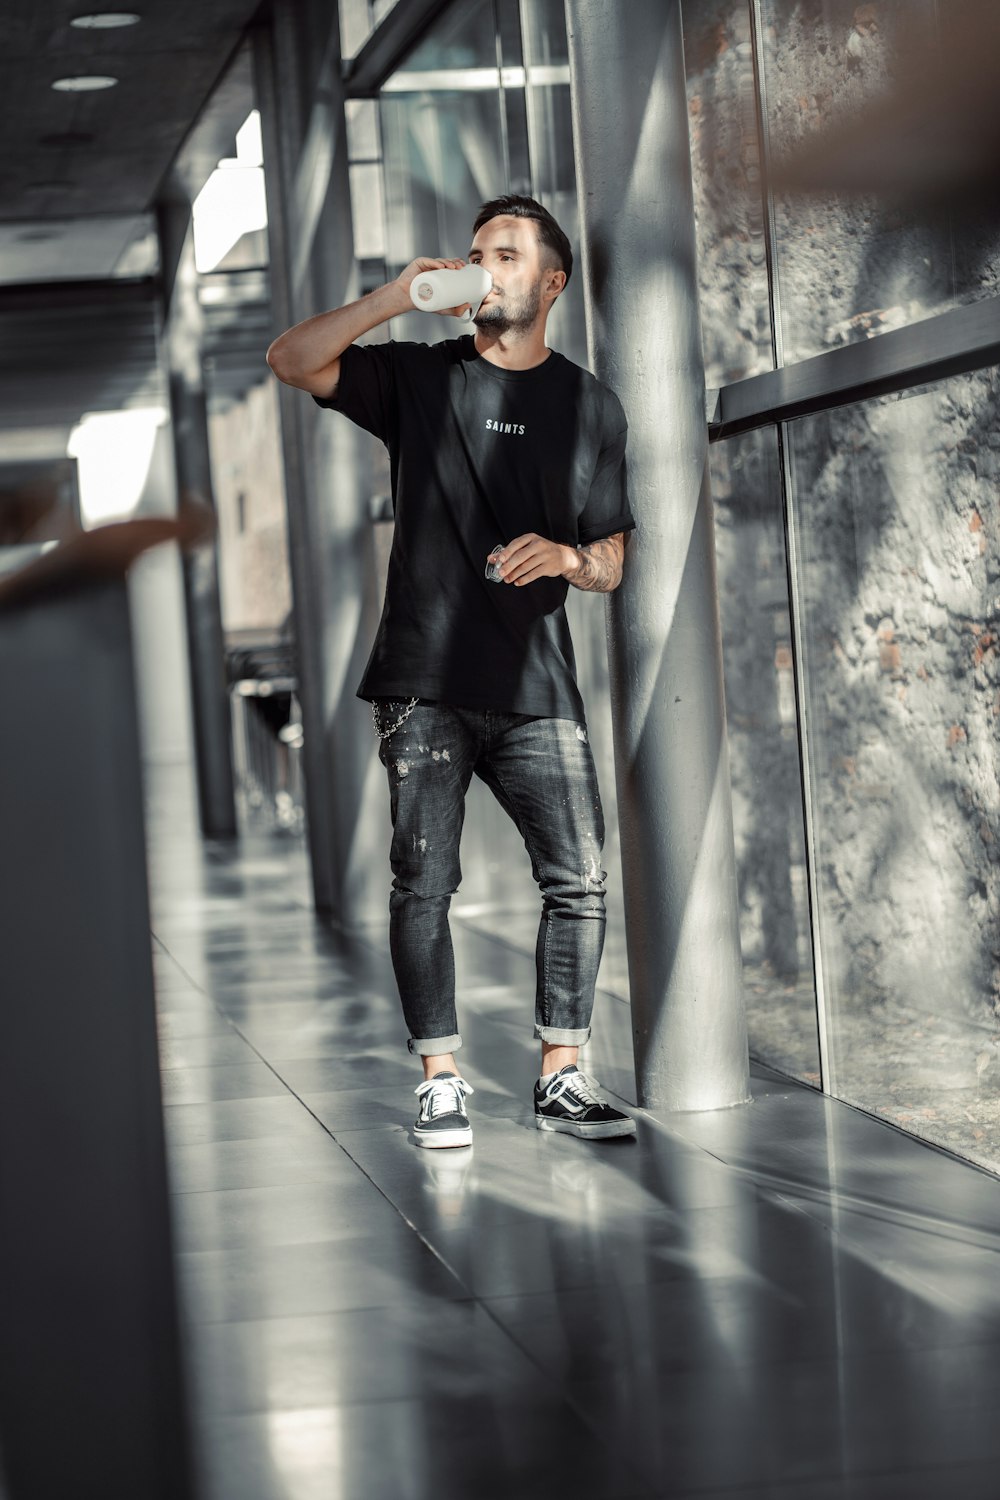 a man standing in a hallway drinking from a bottle